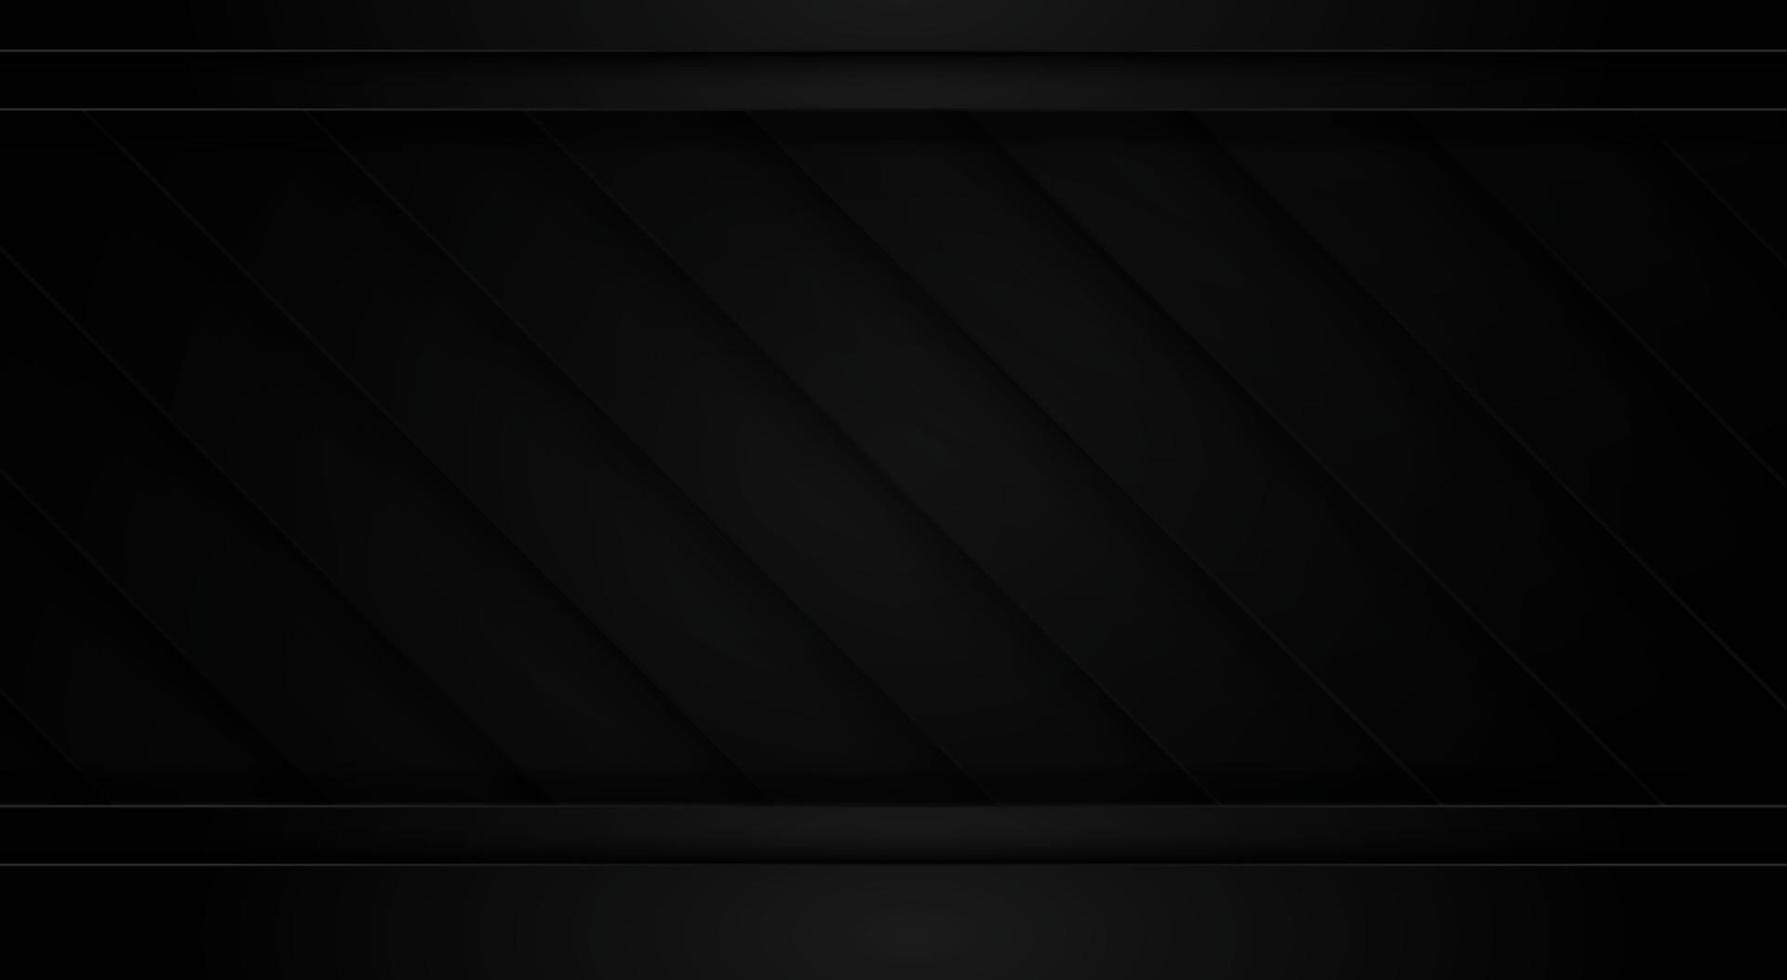 Modern black and dark abstract background vector